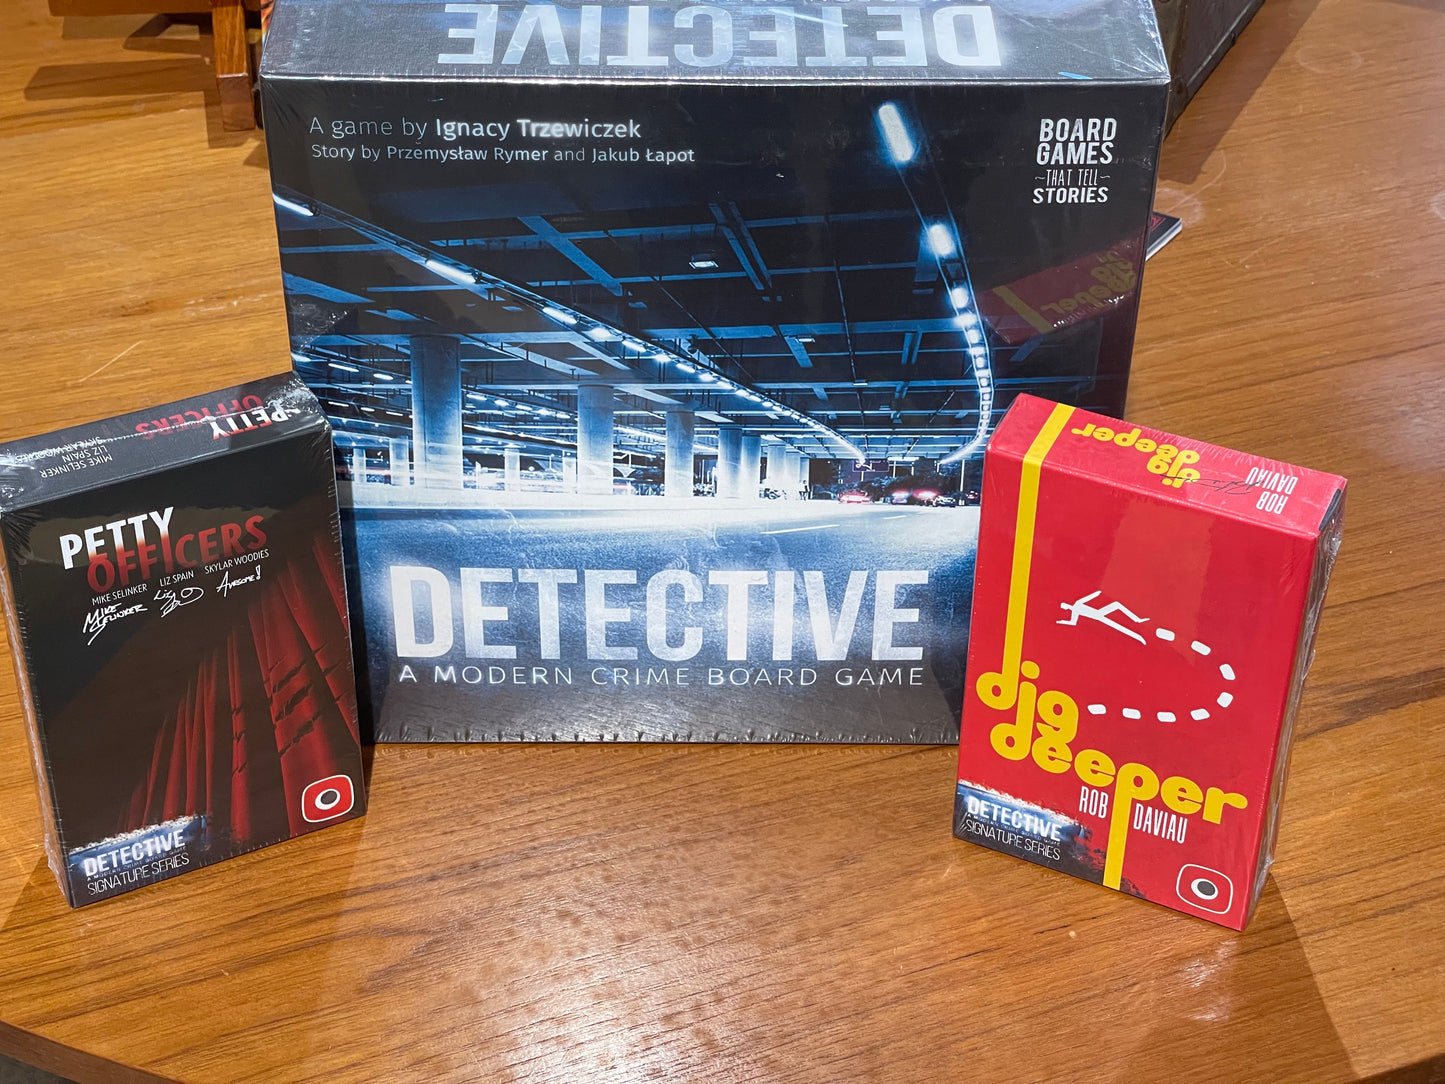 The main game and the two expansion sets, Dig Deeper and Petty Officers - Expansion sets for Detective: A Modern Crime Board Game.  These are expansions to the legendary criminal board game Detective by Ignacy Trzewiczek. For sale at Conundrum House and online at https://conundrum.house